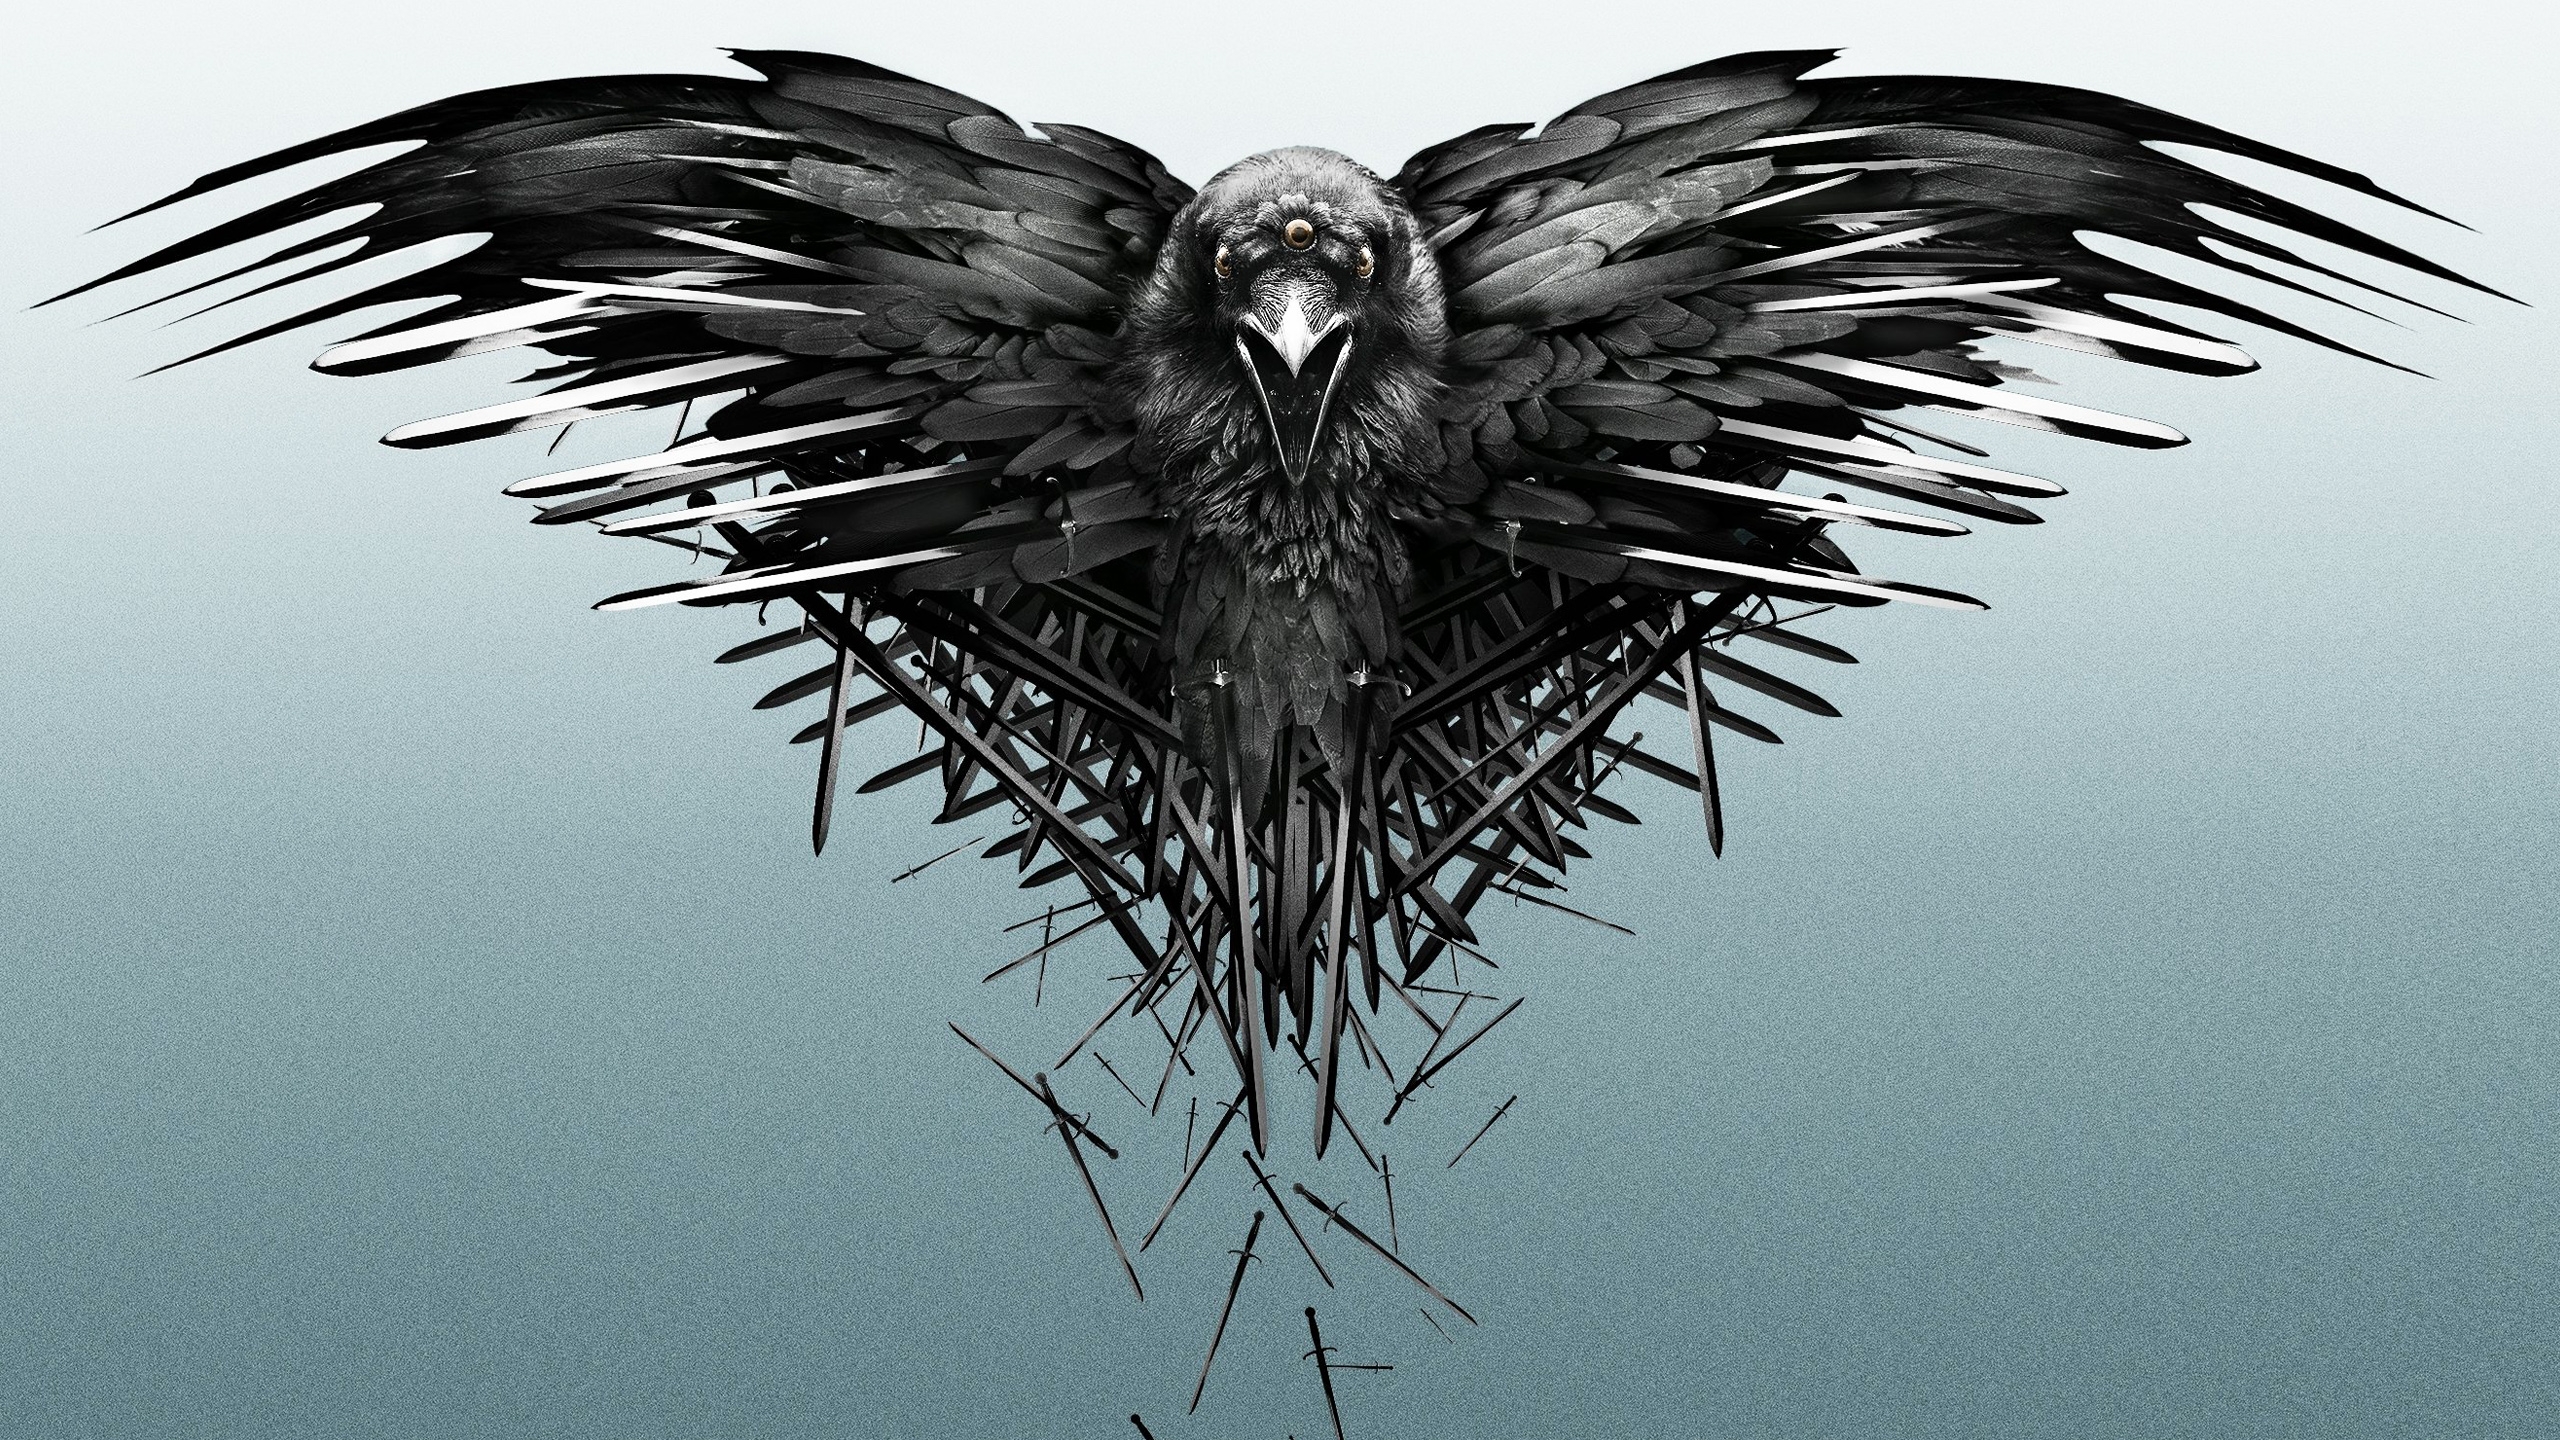 Game of Thrones wallpapers for iPhone